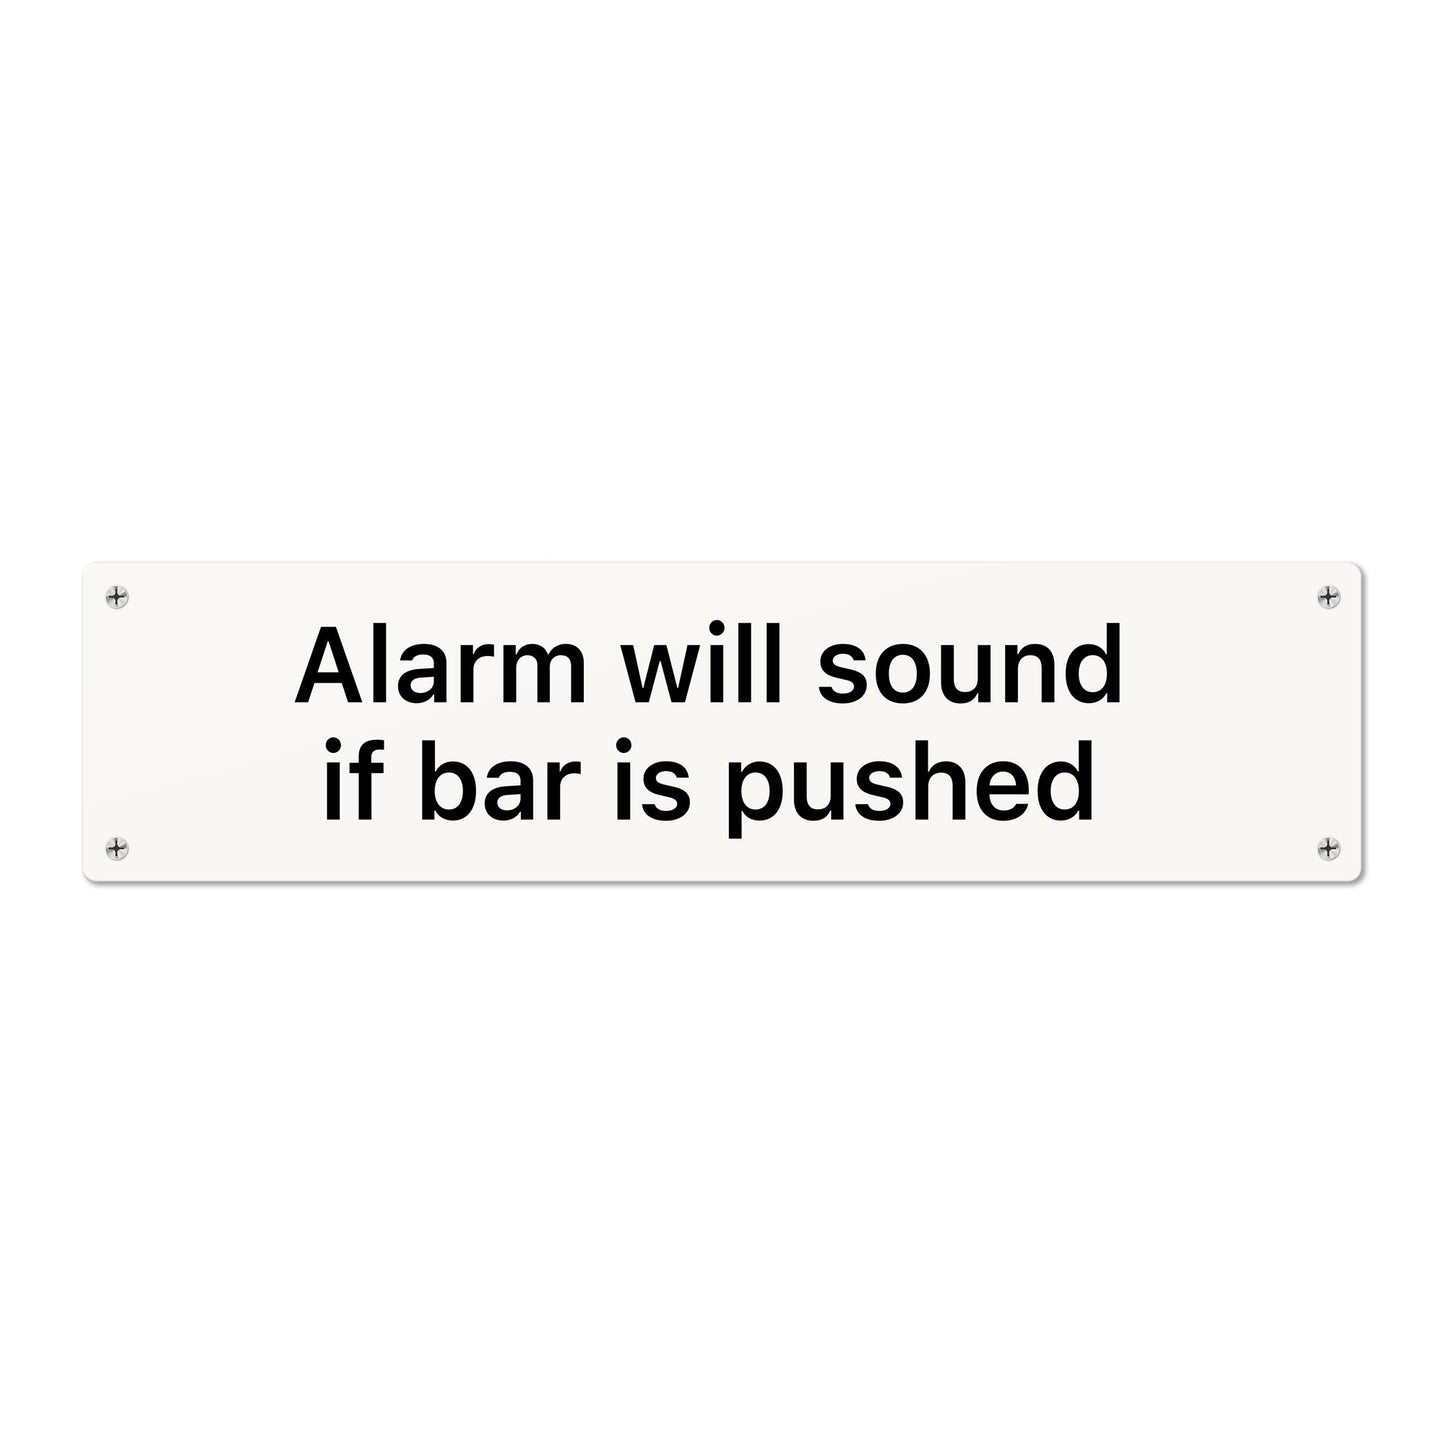 Alarm will sound if bar is pushed